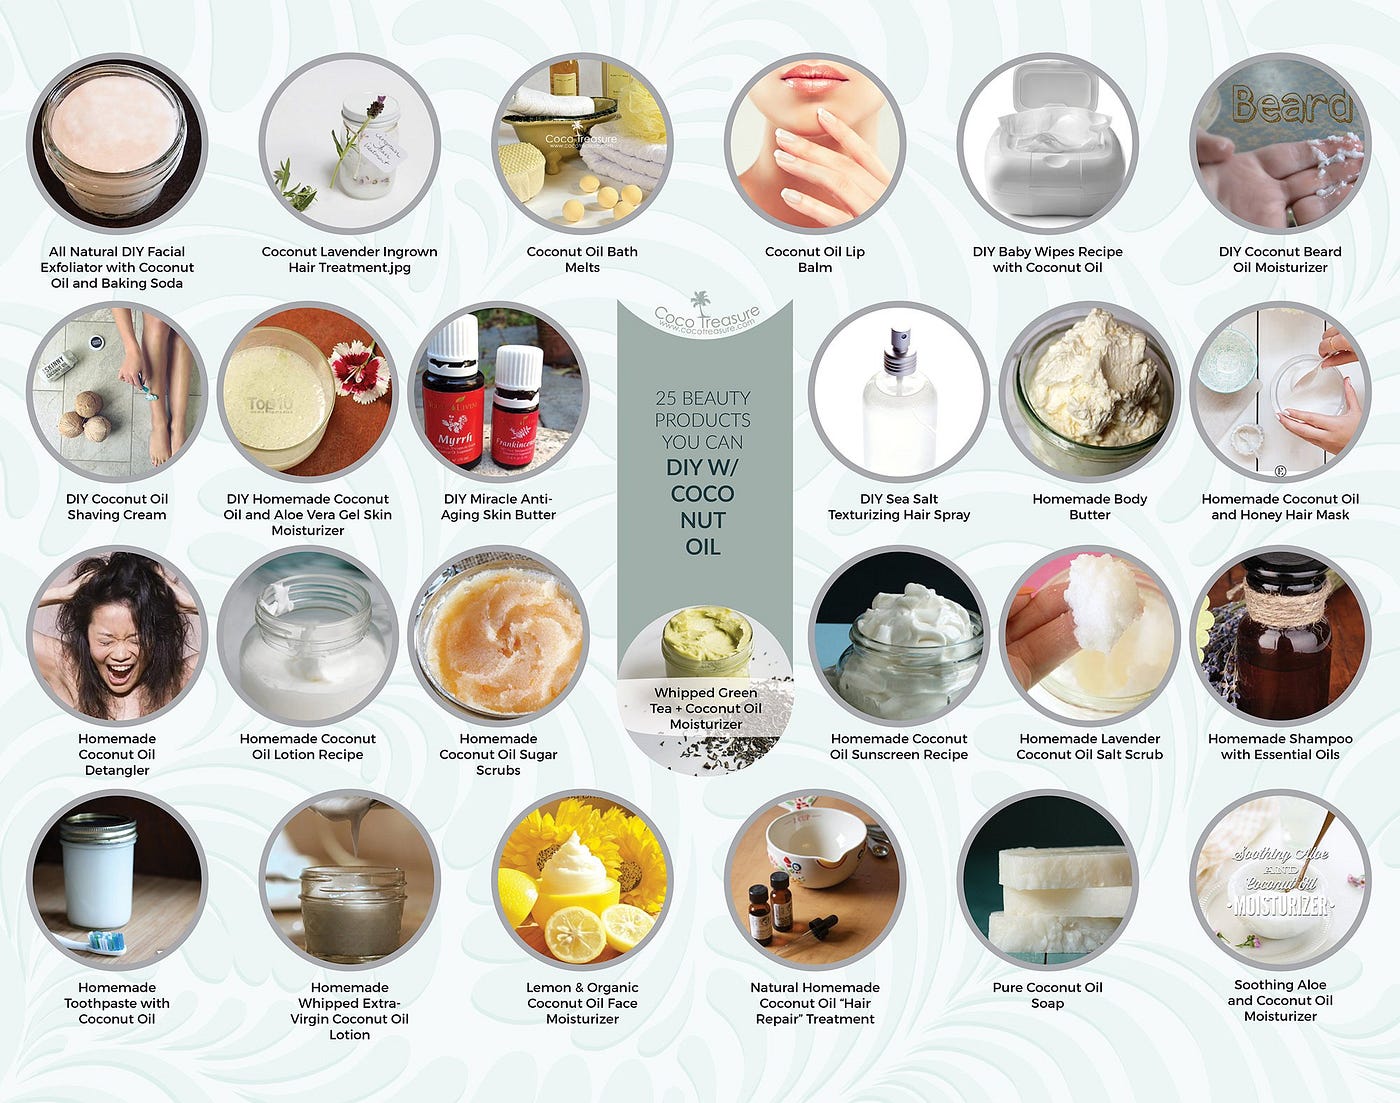 25 Beauty Products You Can DIY with Coconut Oil, by Coco Treasure Organics